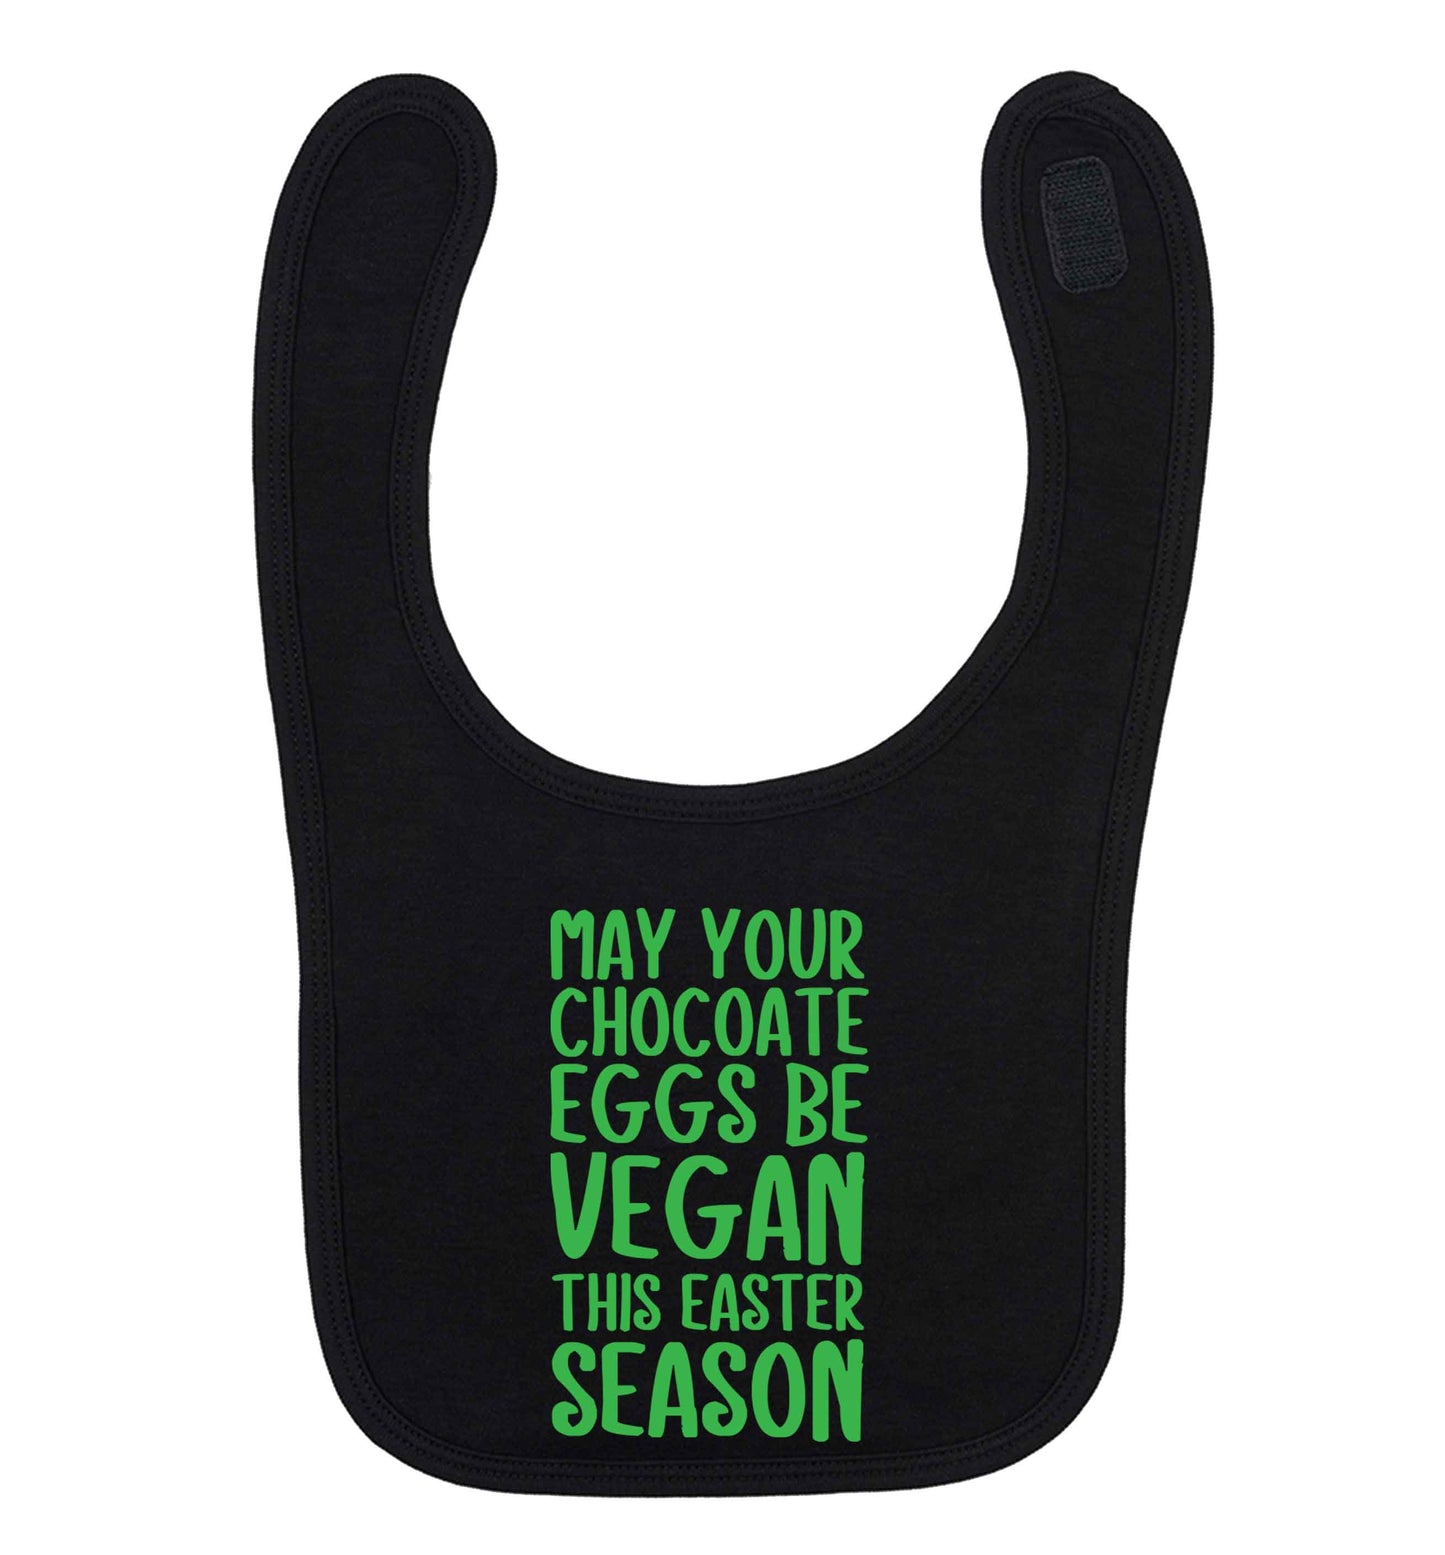 Easter bunny approved! Vegans will love this easter themed black baby bib